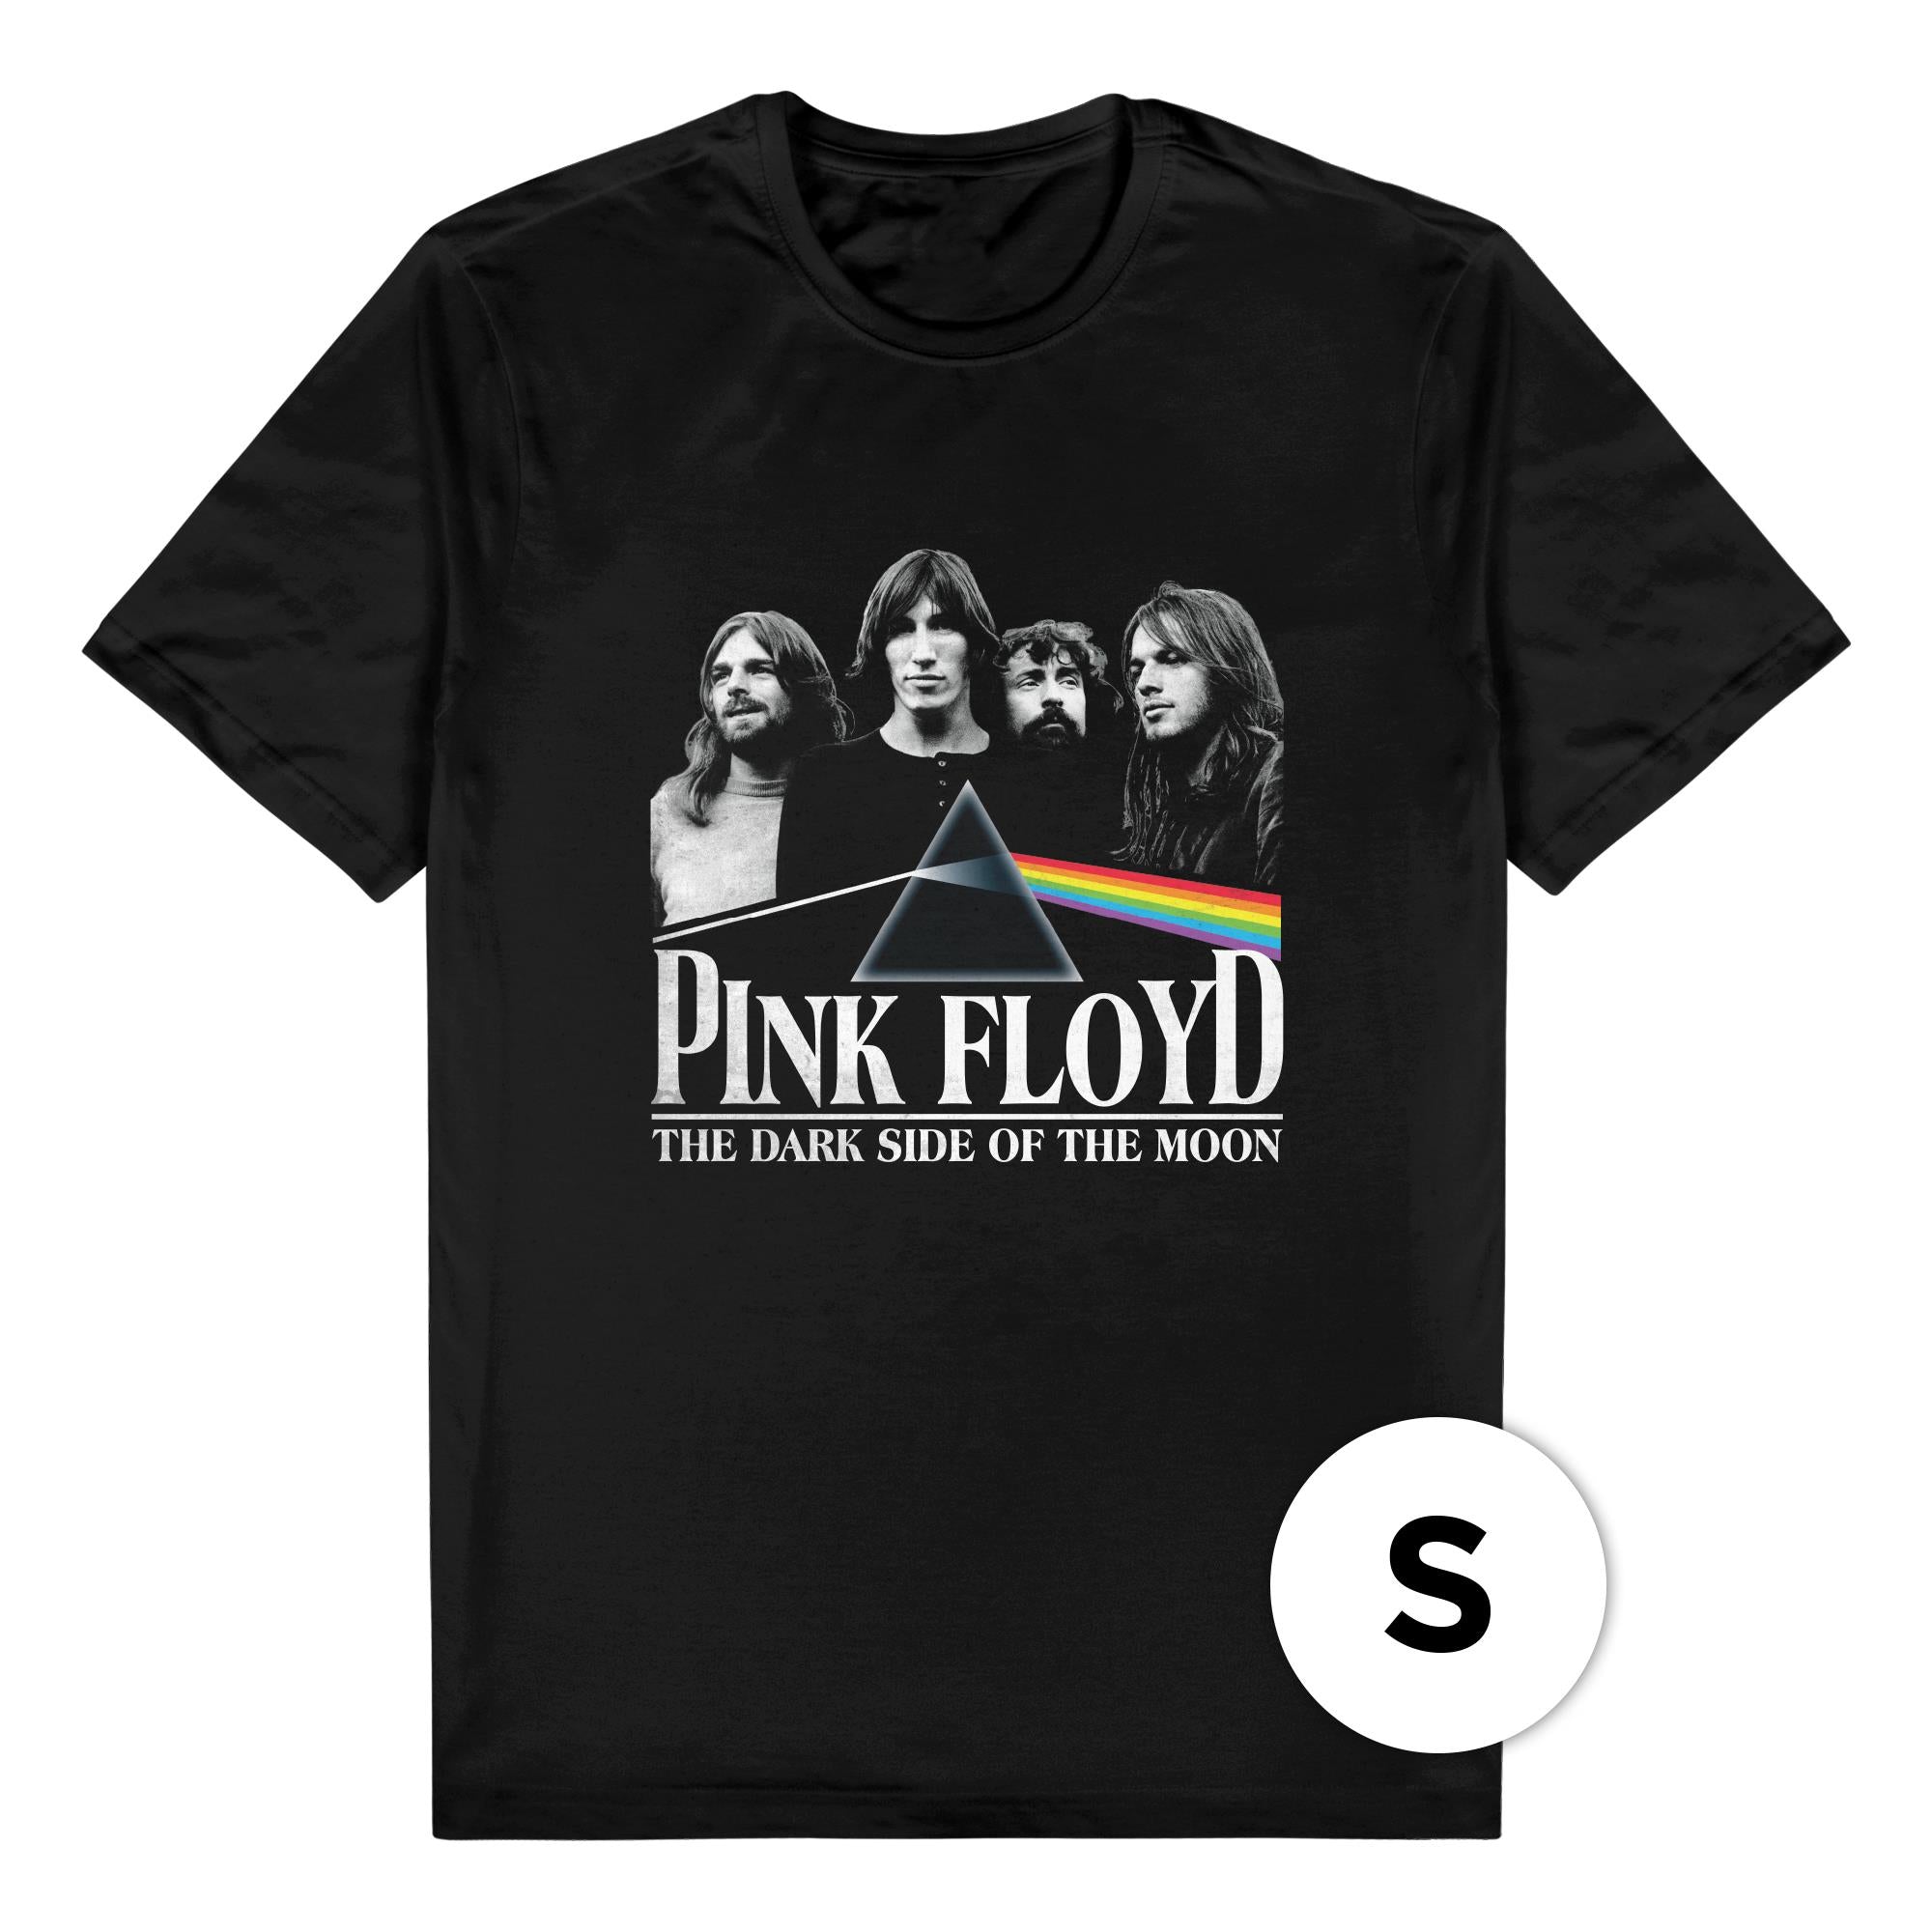 pink floyd - the dark side of the moon t-shirt